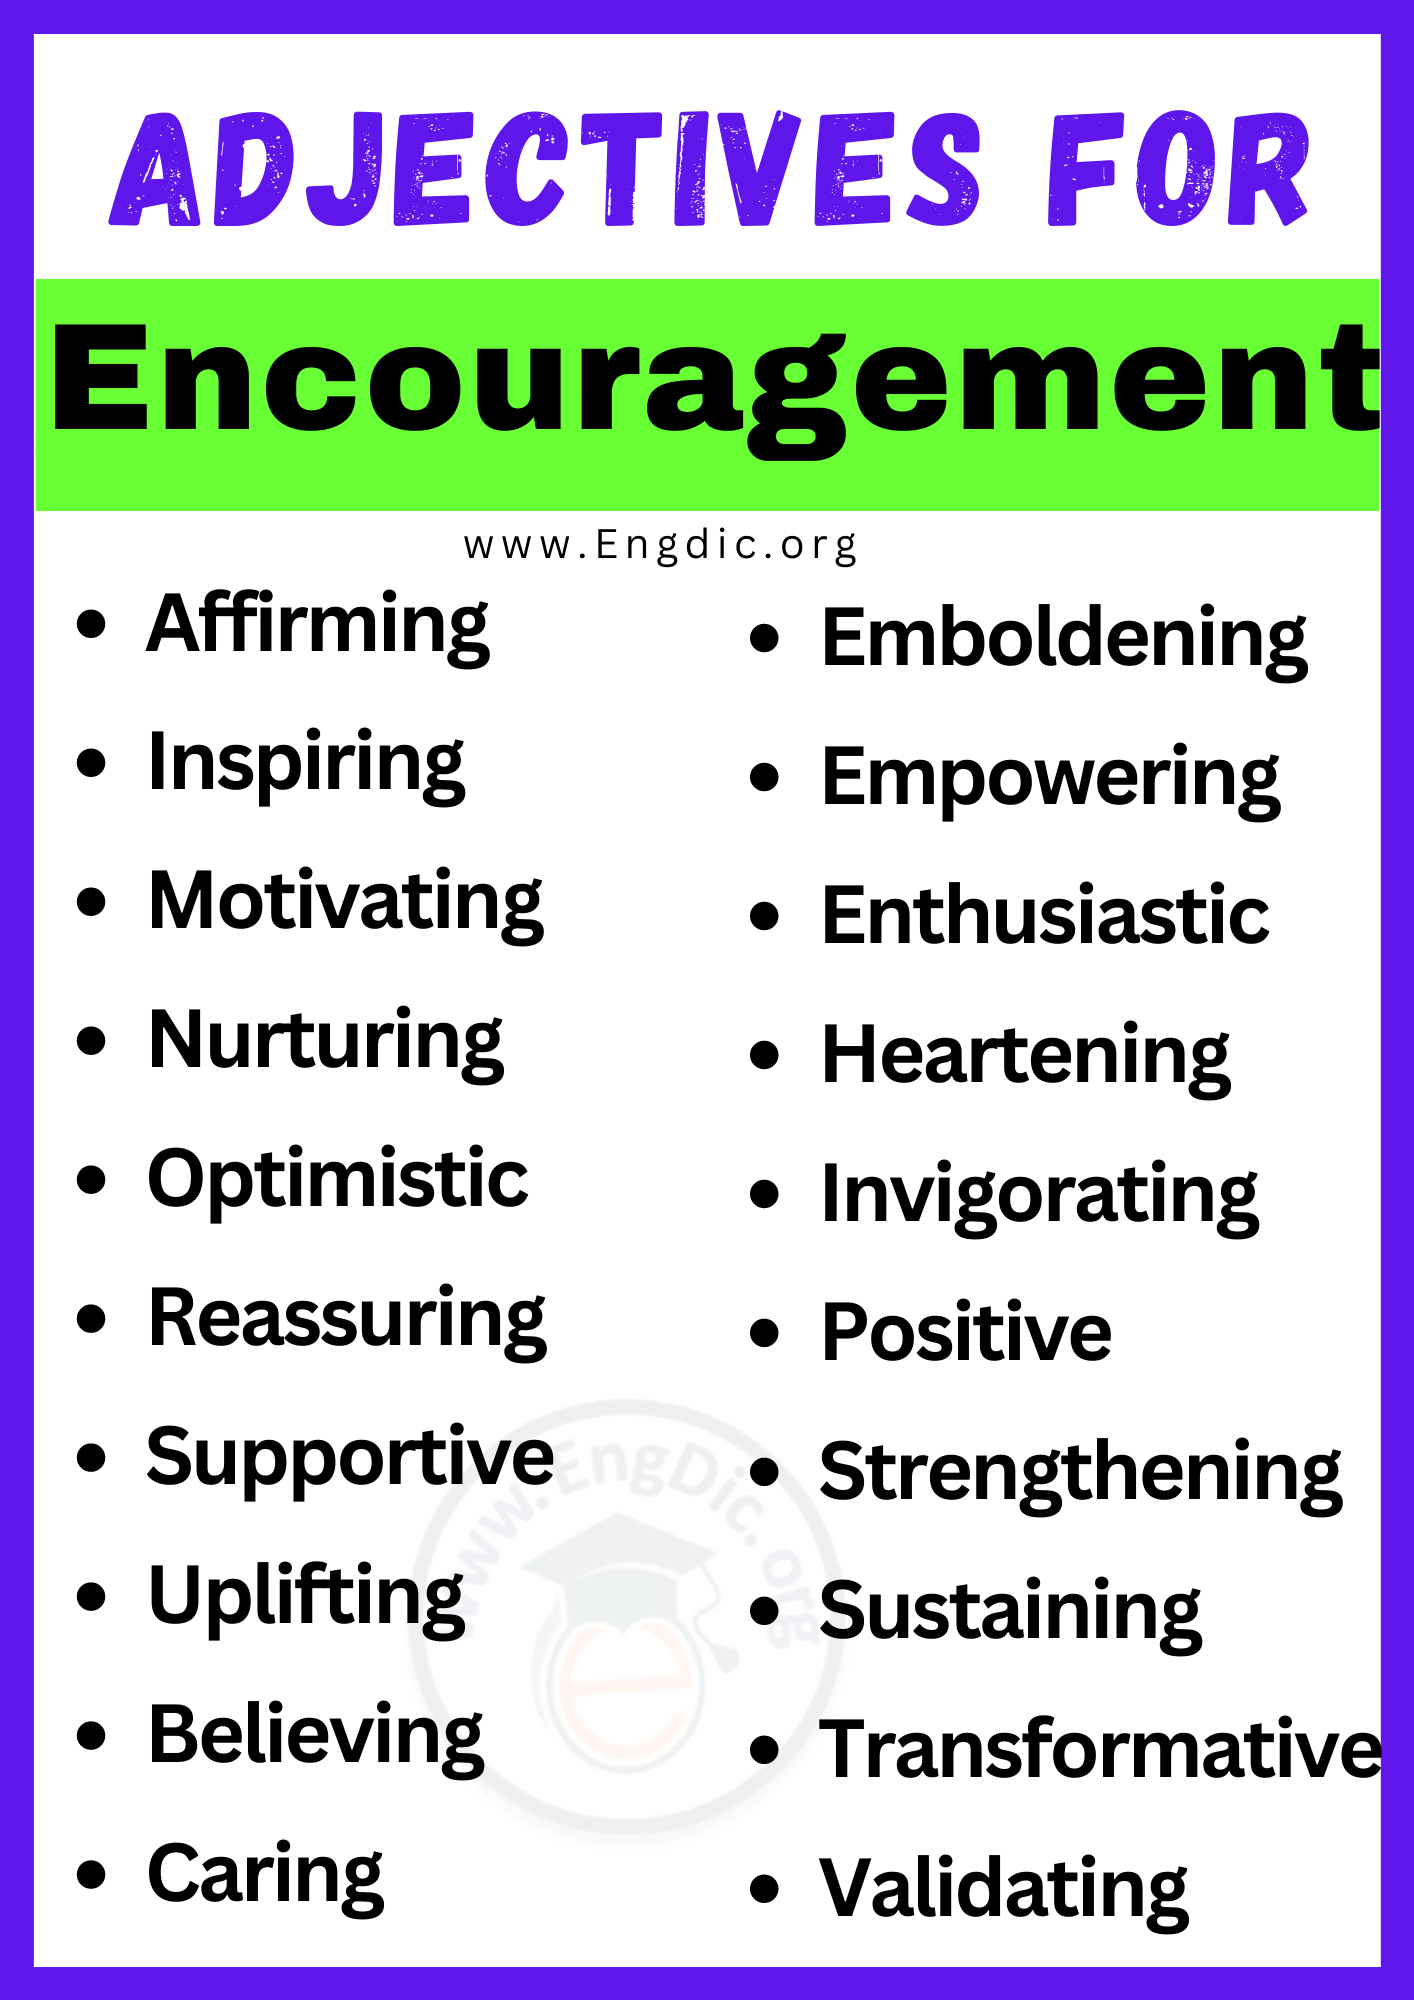 Adjectives for Encouragement